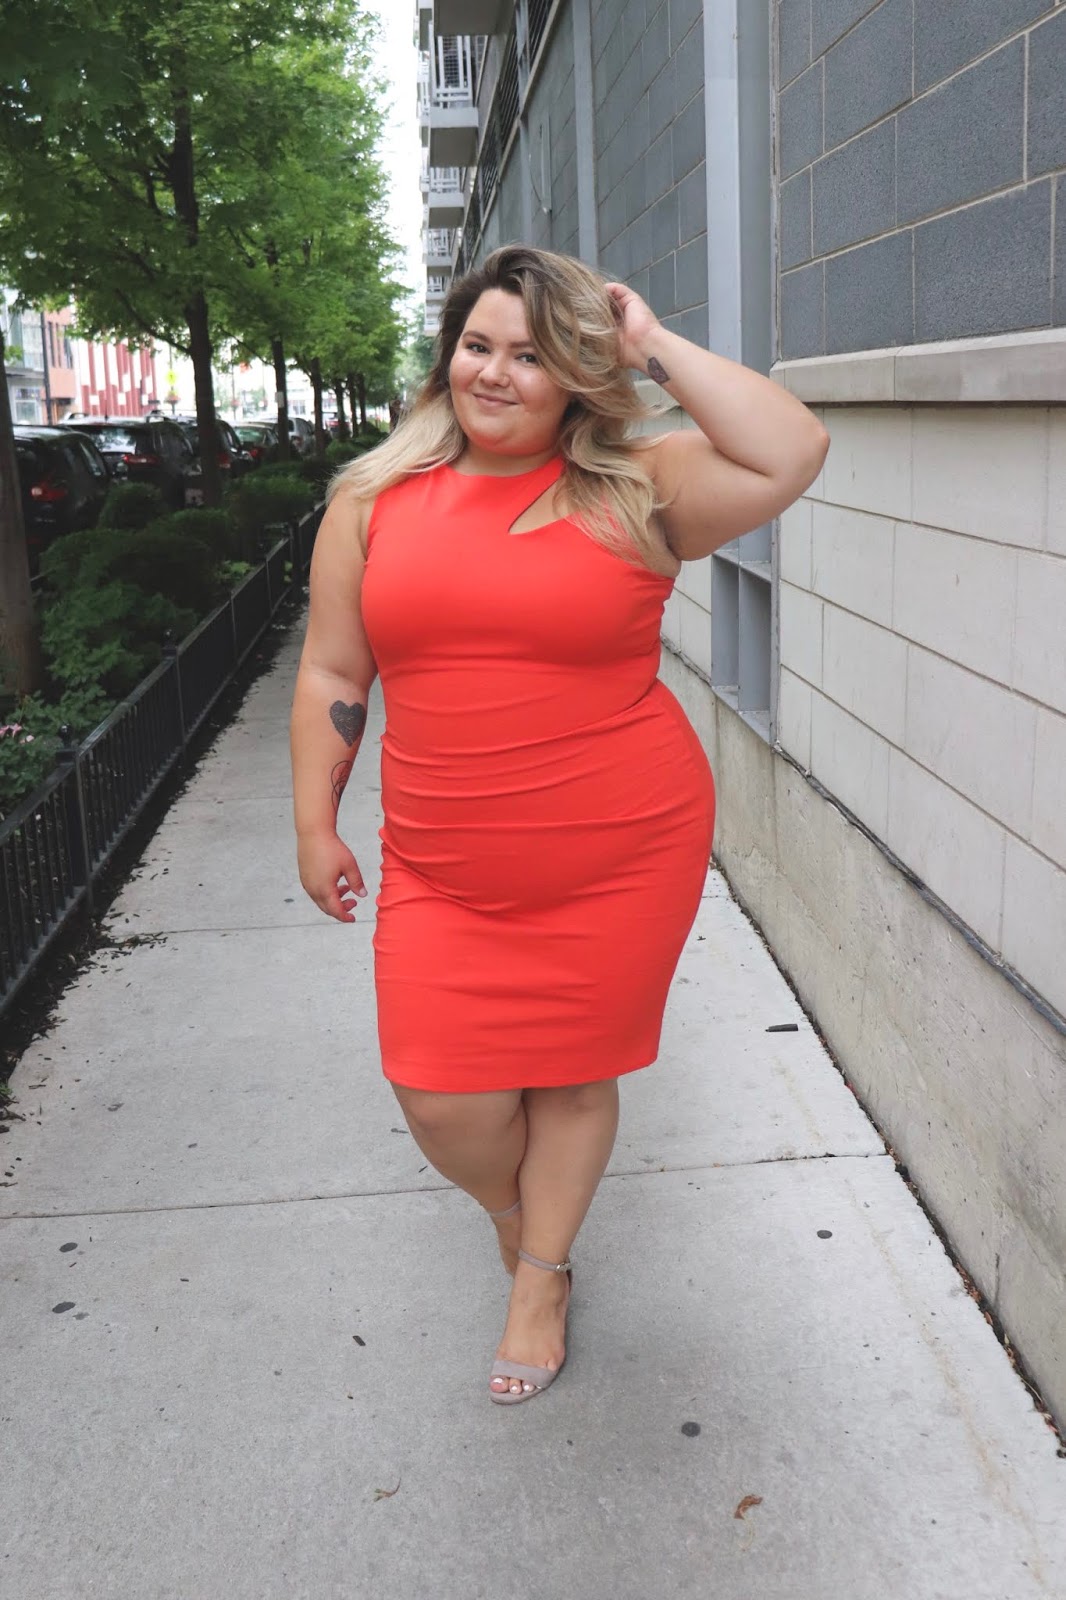 Chicago fashion blogger, Chicago plus size fashion blogger, natalie Craig, natalie in the city, plus size fashion, Chicago fashion, plus size fashion blogger, eff your beauty standards, fatshion, skorch magazine, Chicago model, plus size model, plus size petite, affordable plus size clothing, embrace your curves, plus model magazine,  petite plus size, fashion nova, fashion nova curve, orange cutout dress